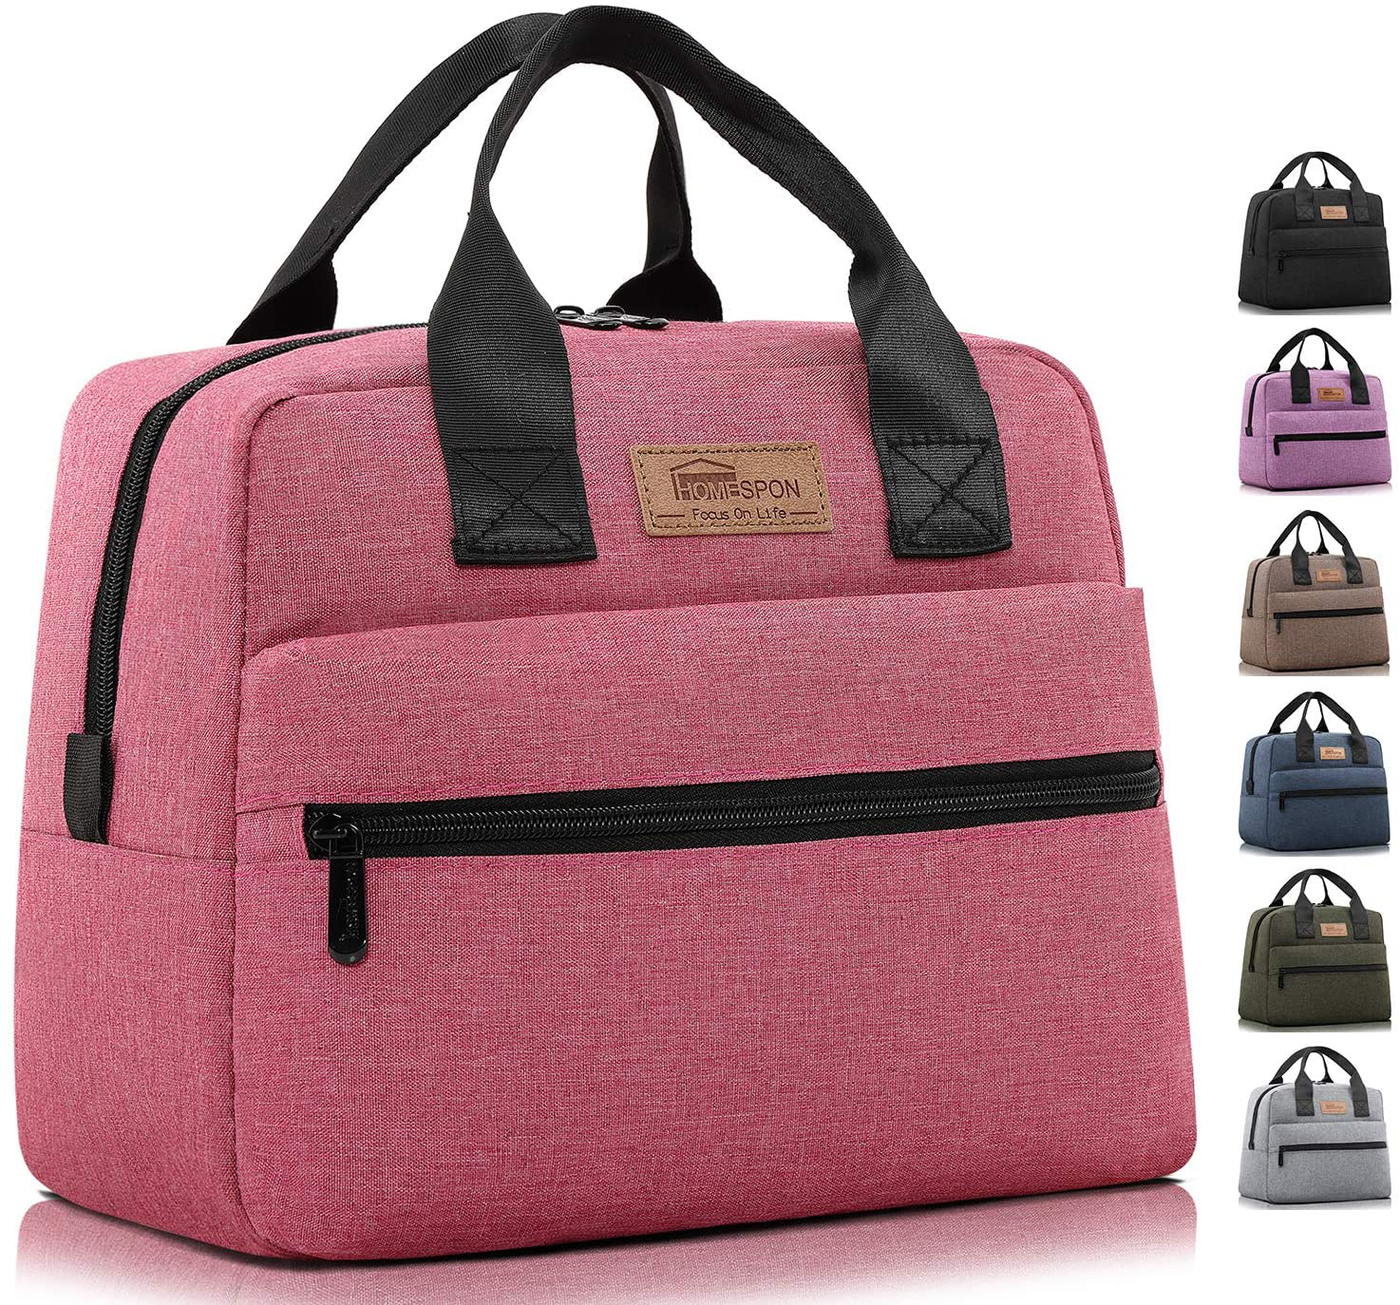 HOMESPON Insulated Lunch Bag Lunch Box Cooler Tote Box Cooler Bag Lunch Container for Women/Men/Work/Picnic,Large pink